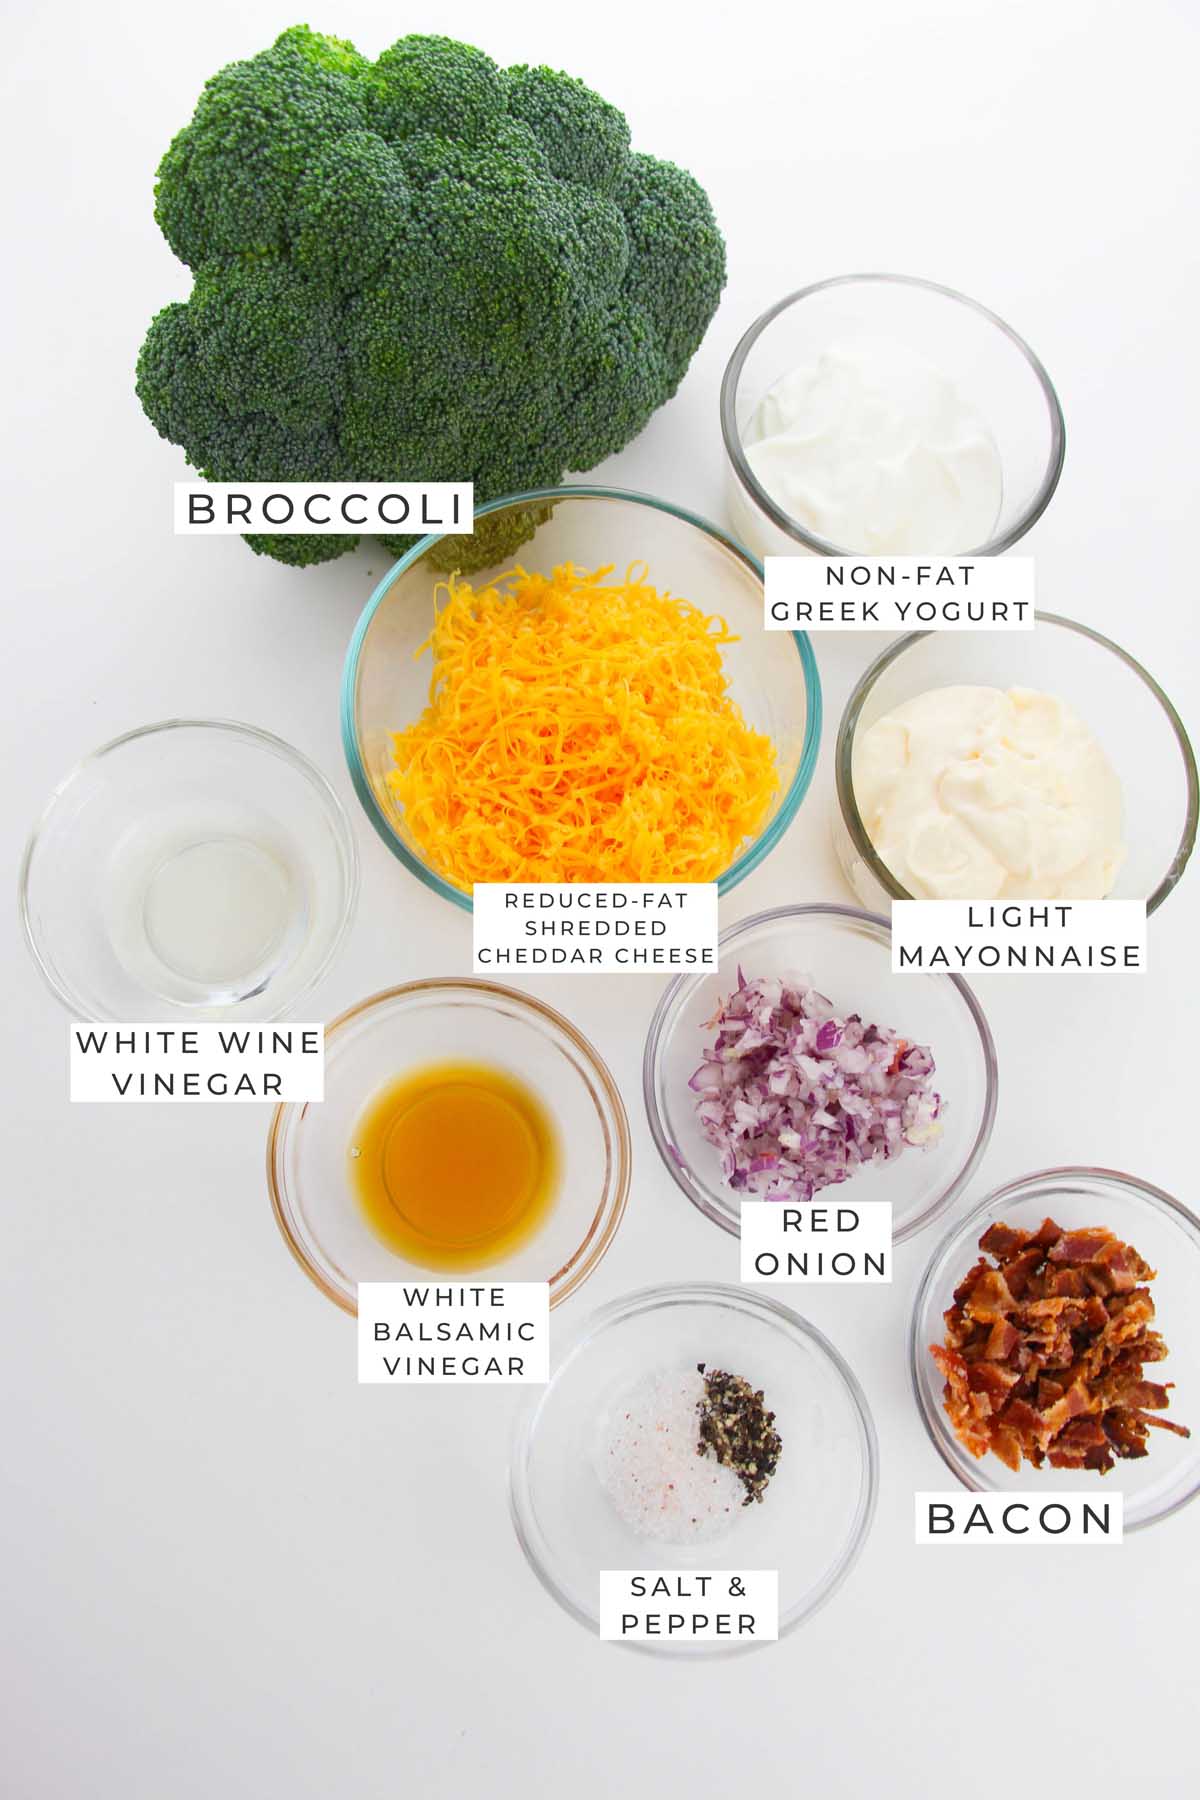 Labeled ingredients for the broccoli salad.